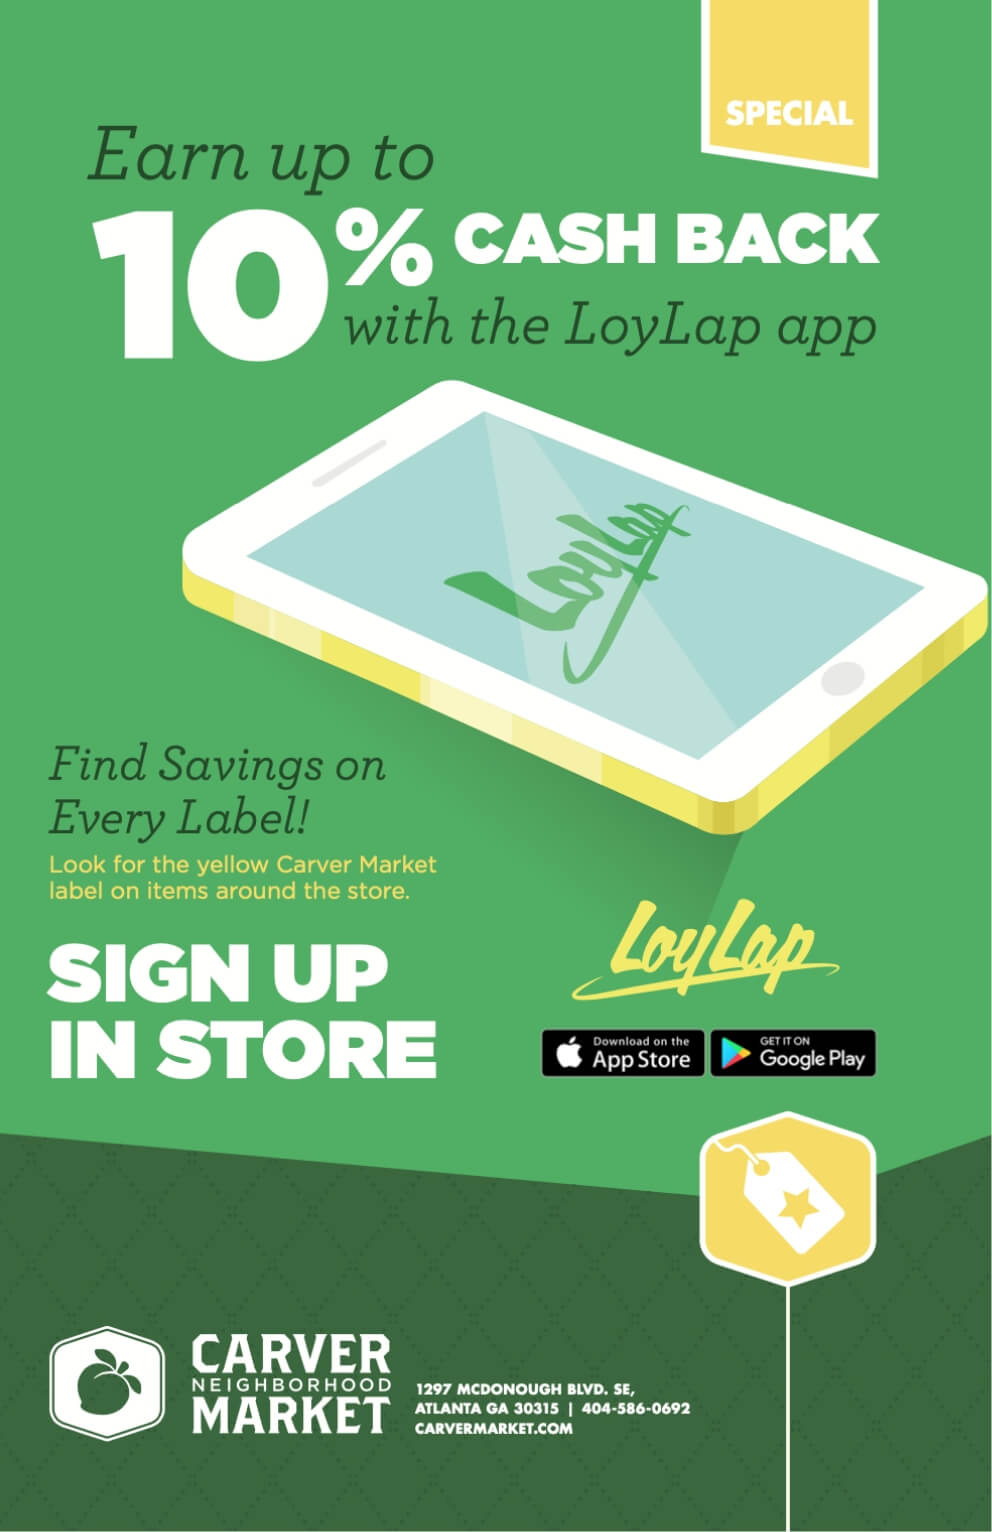 Find Savings with LoyLap Photo